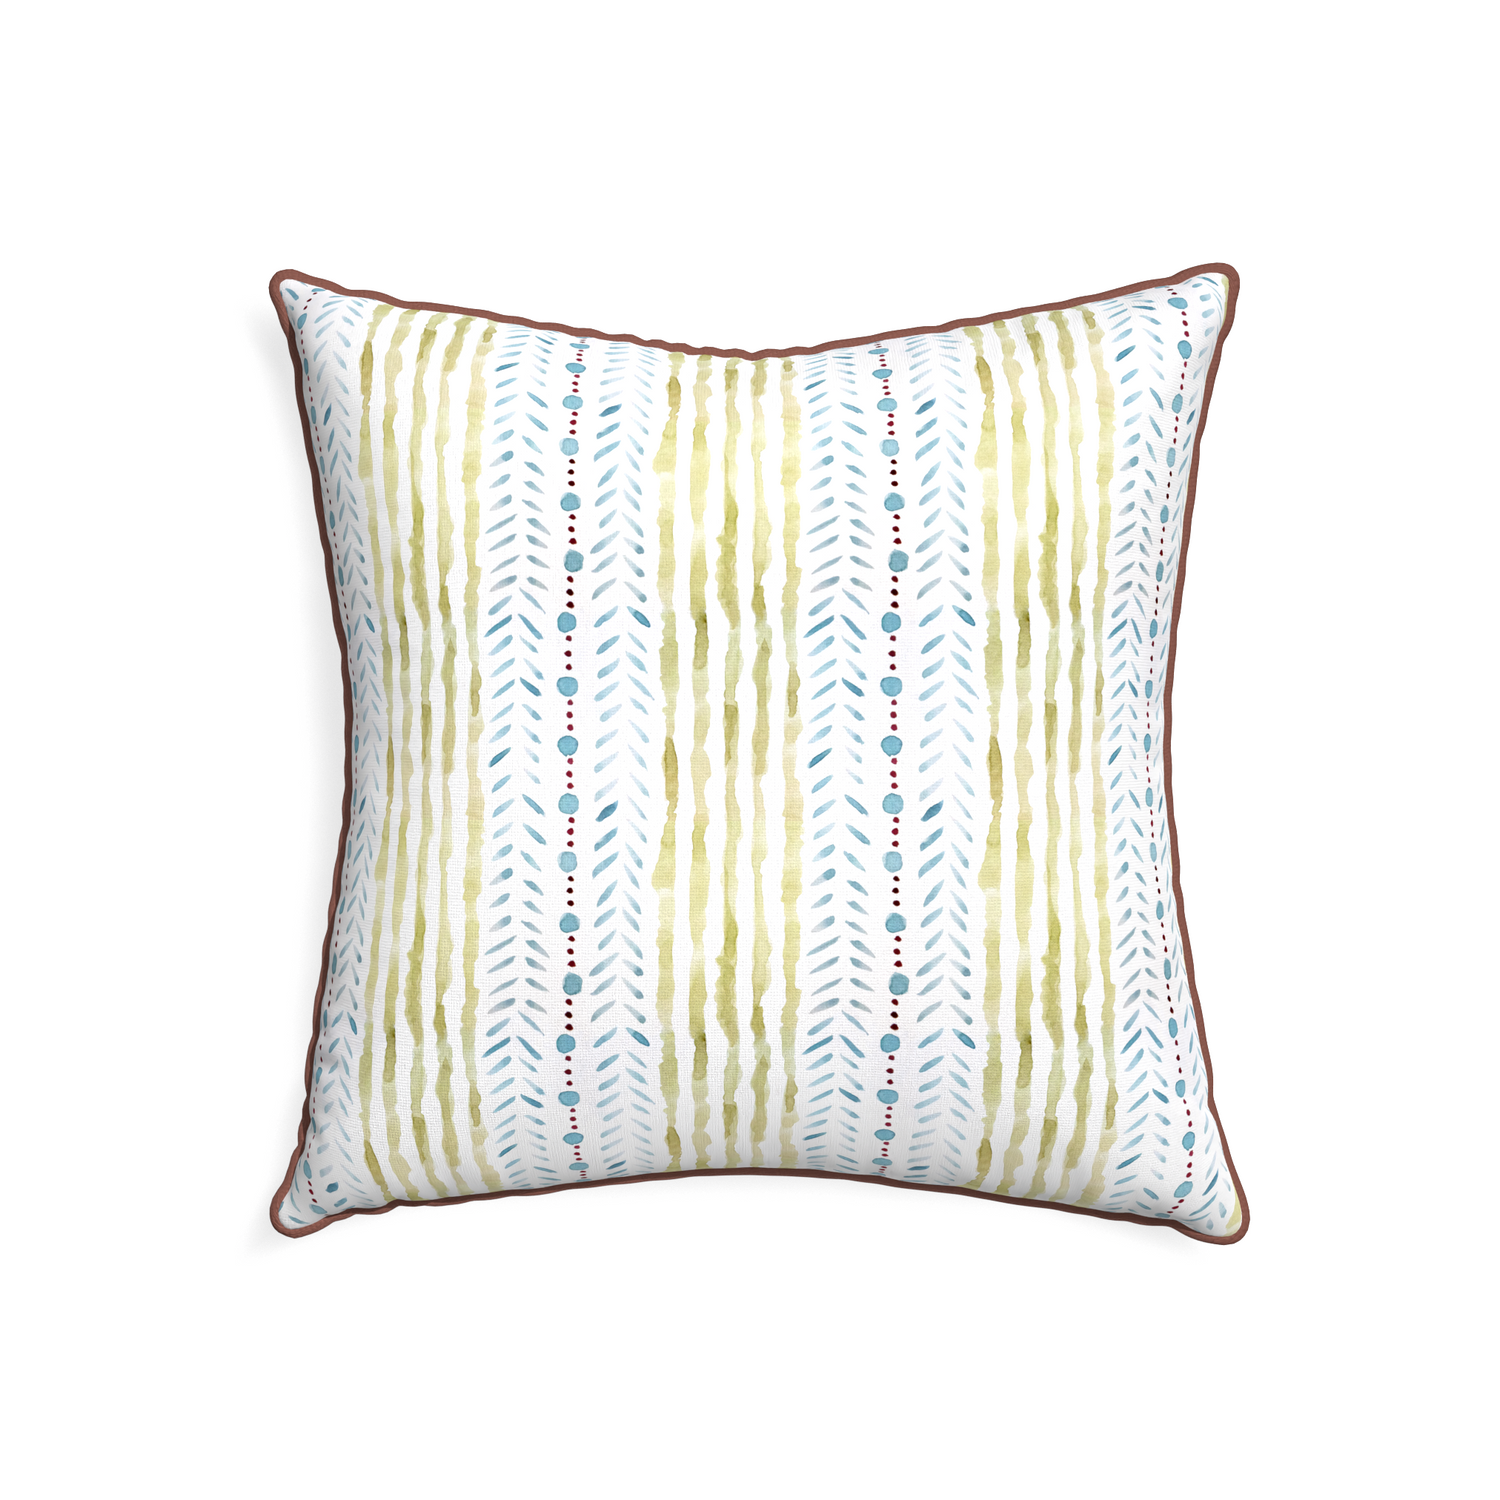 22-square julia custom blue & green stripedpillow with w piping on white background